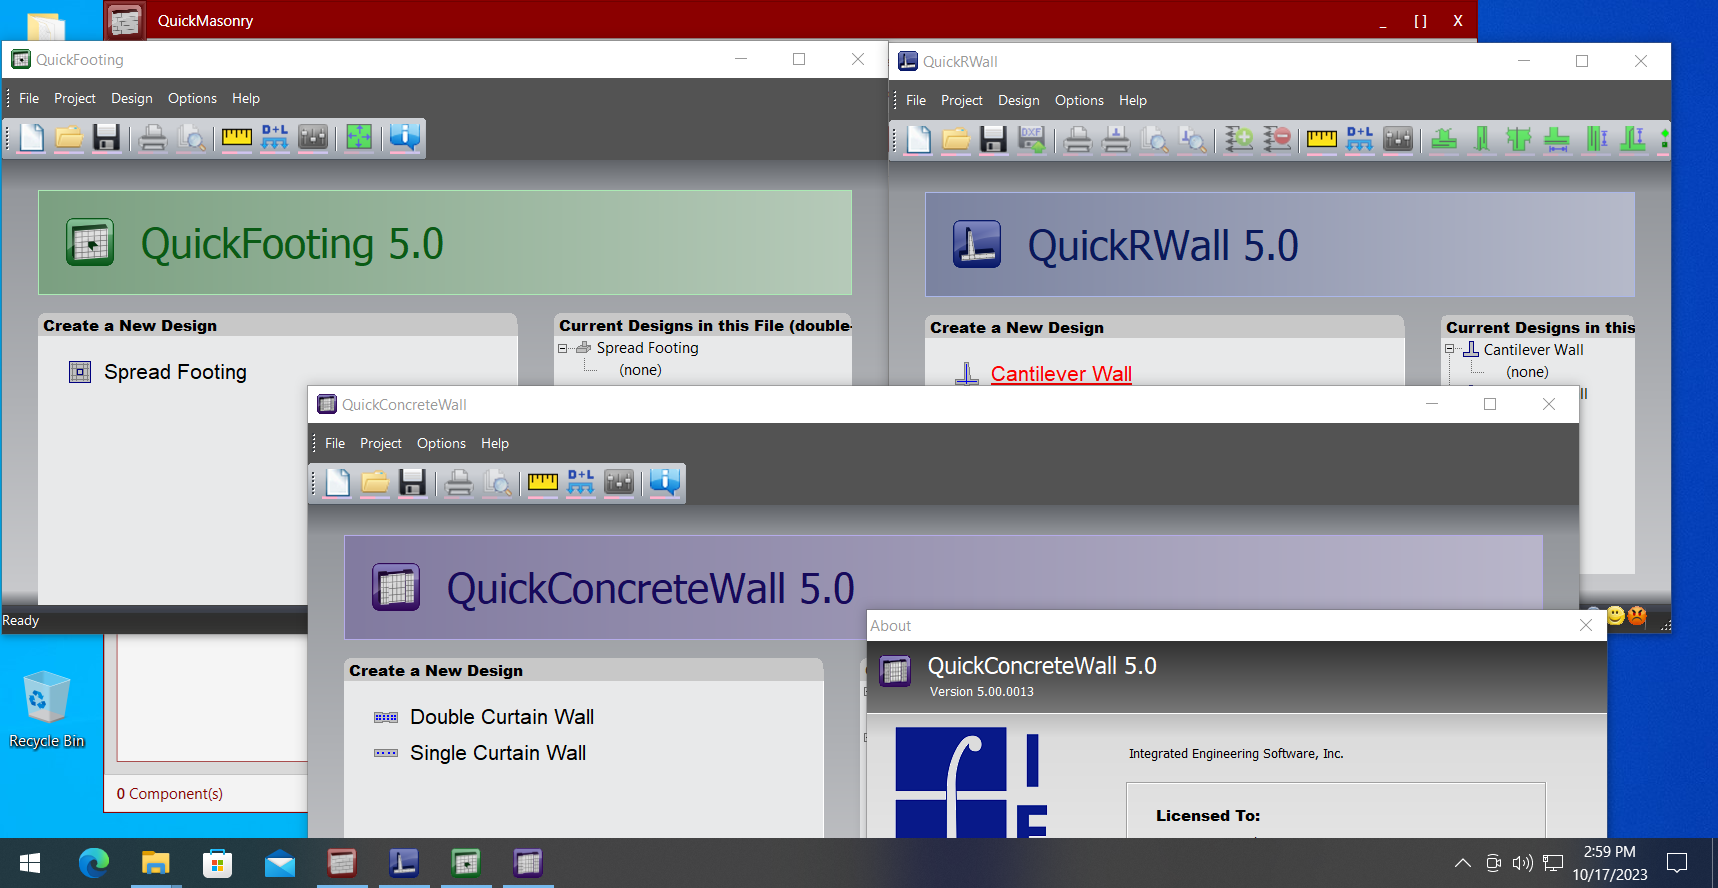 Working with IES Quick Suite 5.6 full license